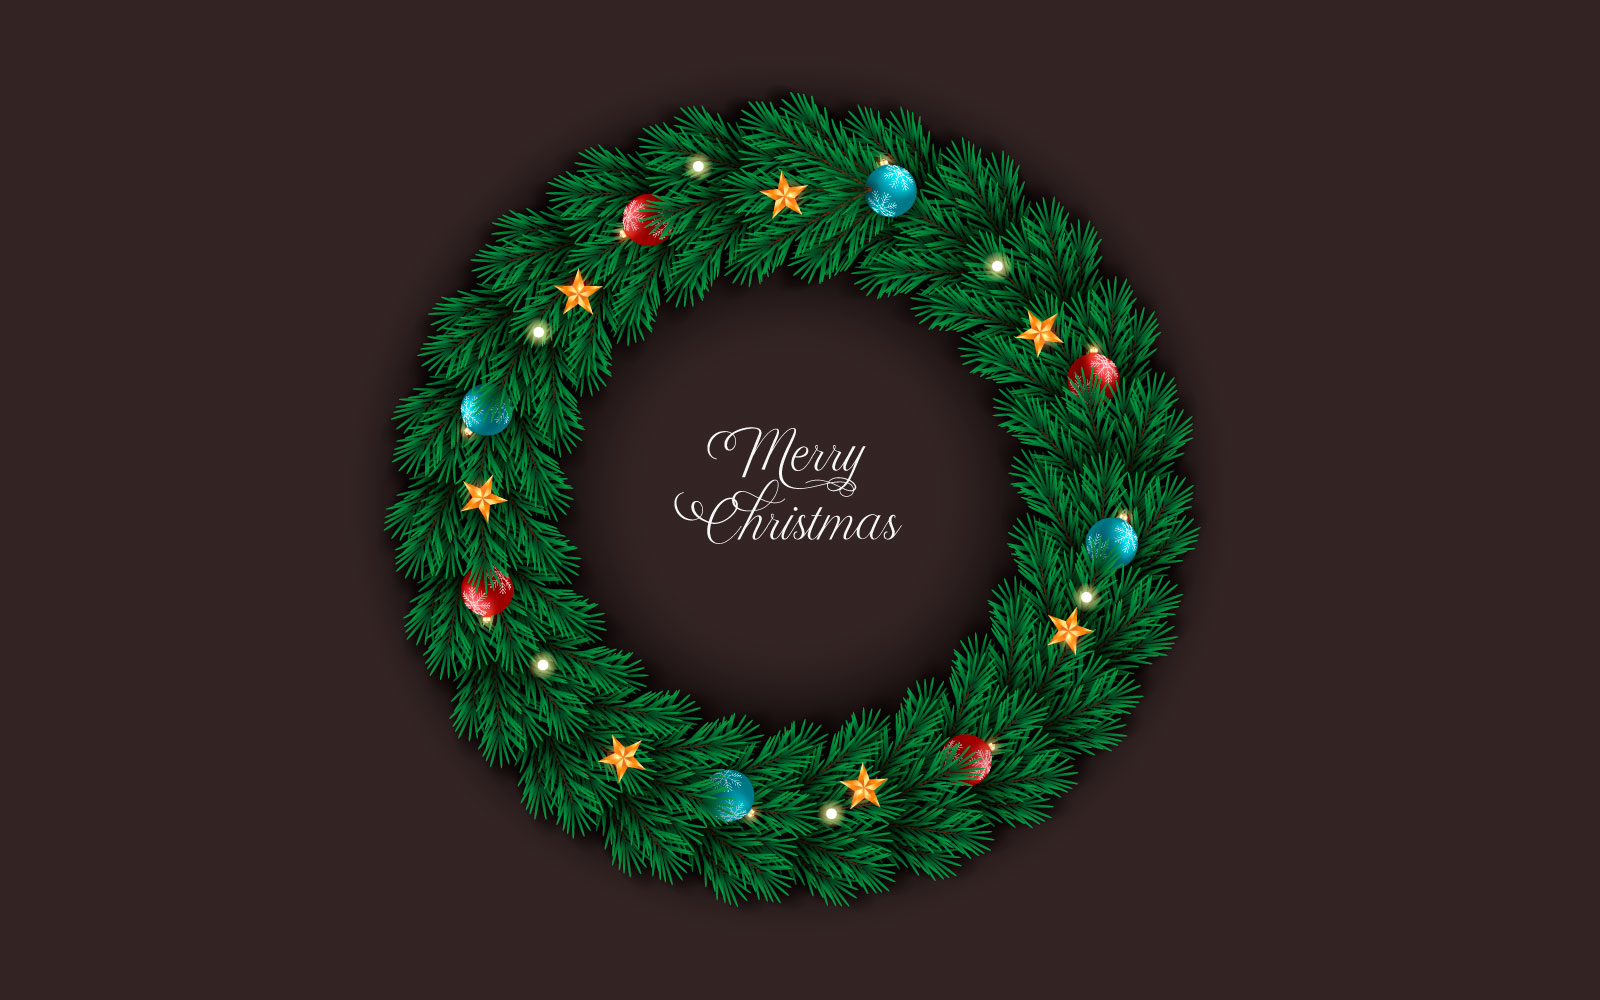 Best christmas wishes wreath with decorated holiday wreath illustration